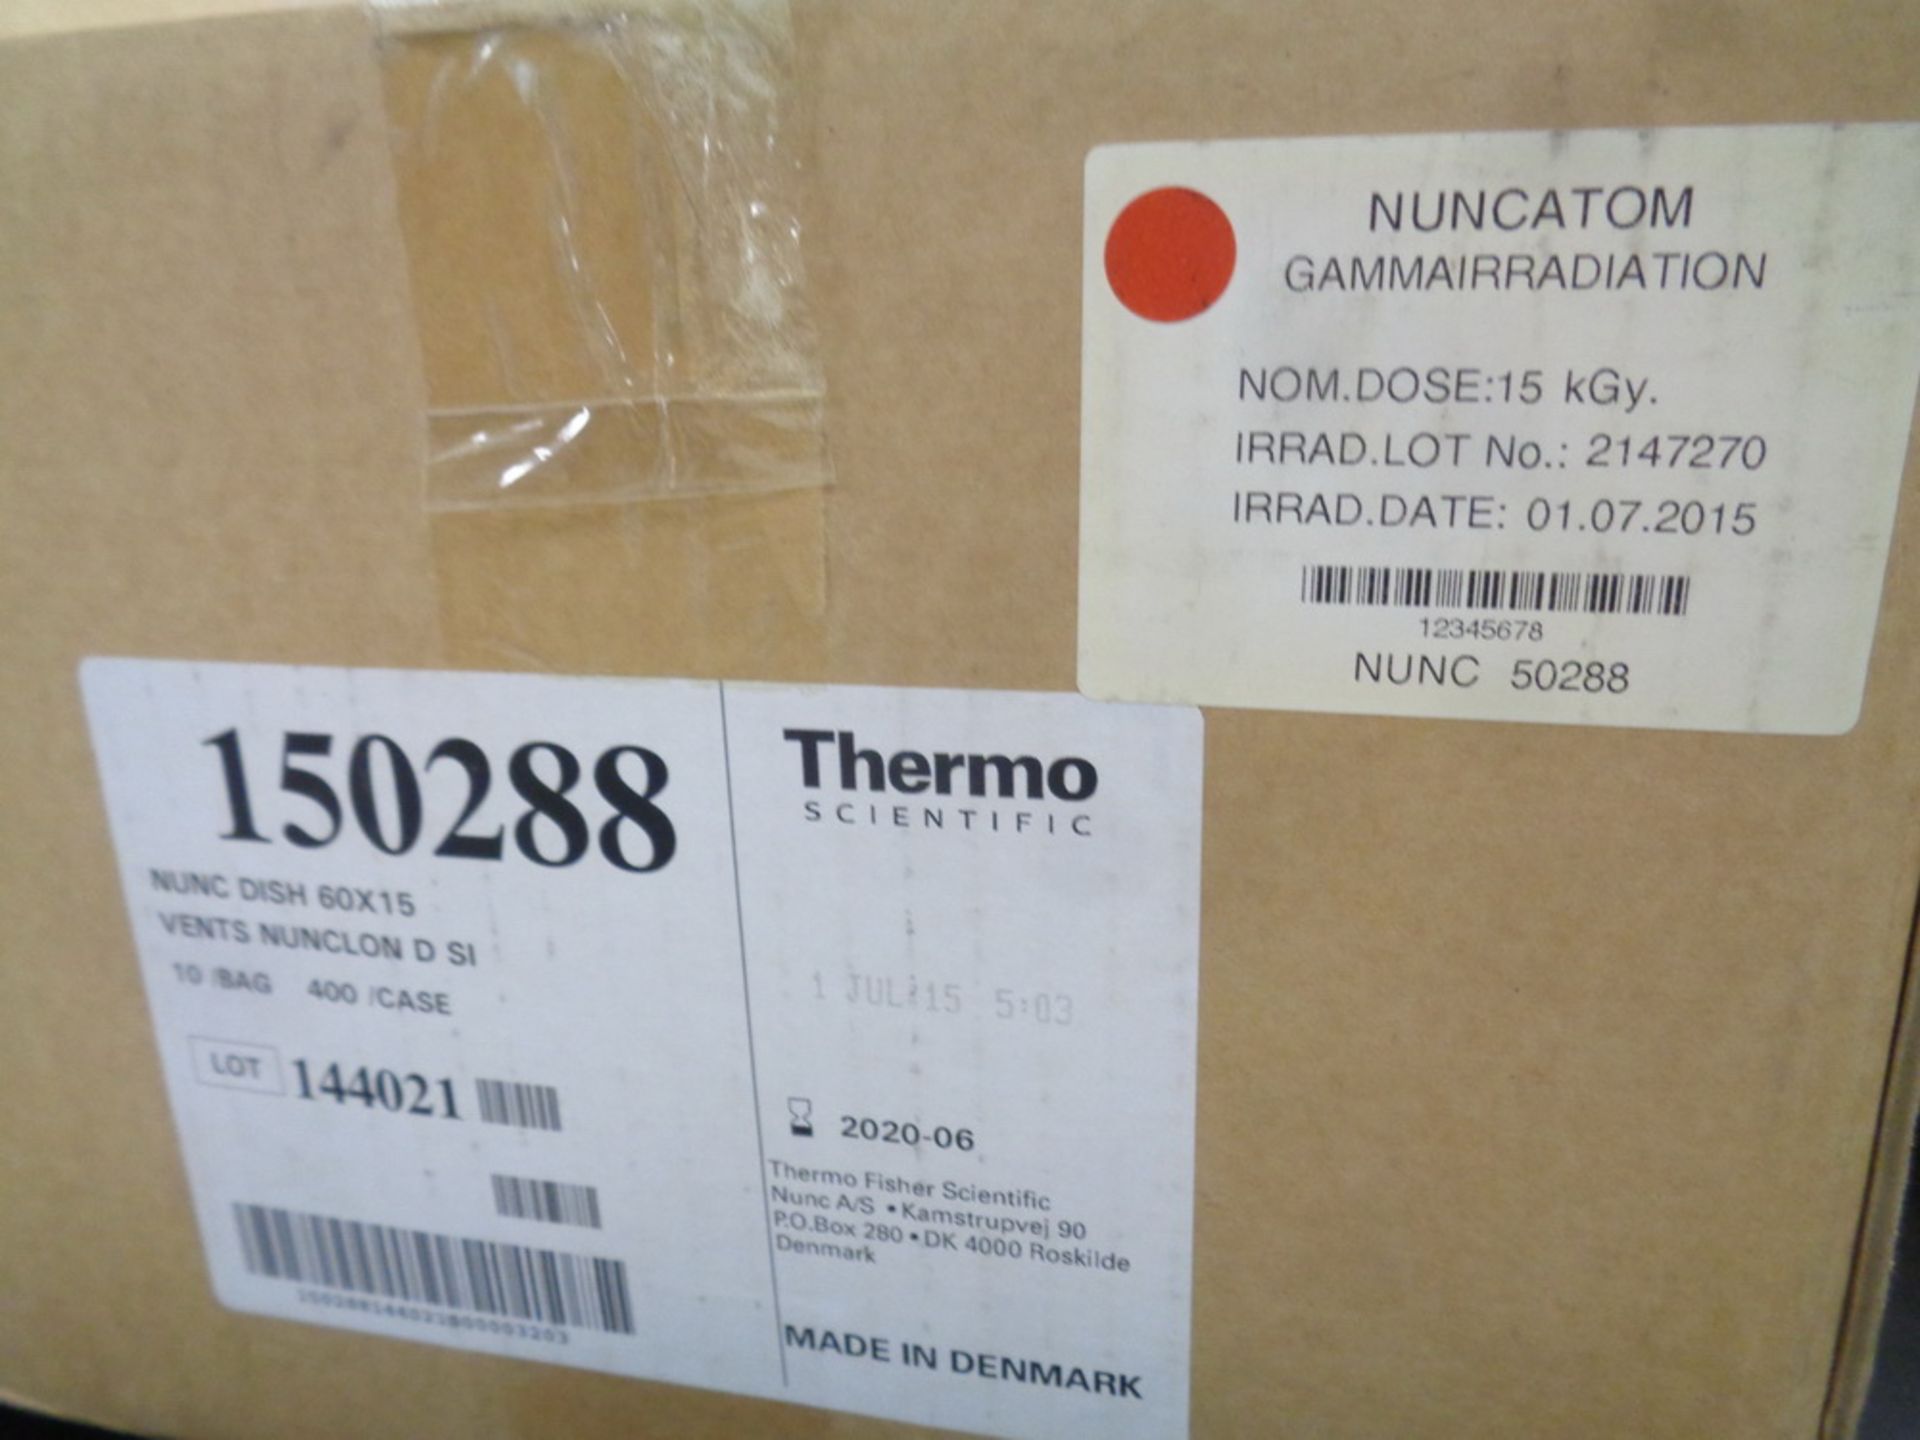 Case of Thermo NUNC Cell Culture/Petri Dishes (60 x 15), Product # 150288 - Image 2 of 2